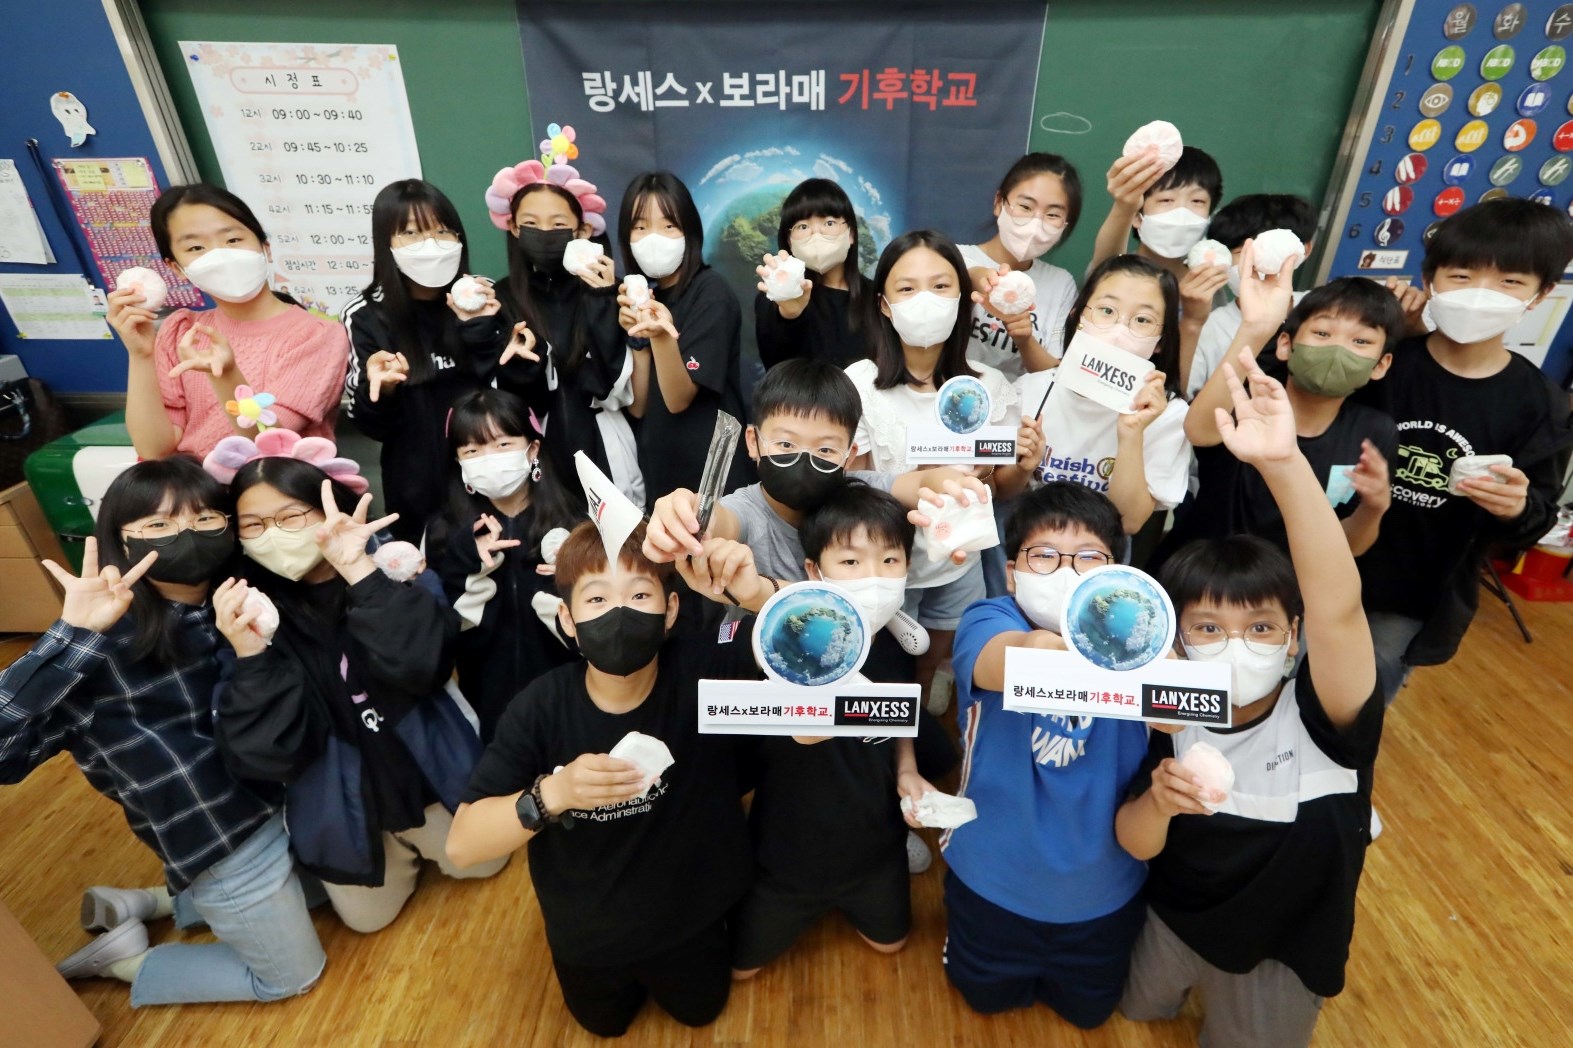 Students from Seoul Daelim Elementary School participated in the “LANXESS Climate School” and learned how to practice in daily life to protect environment and climate. 